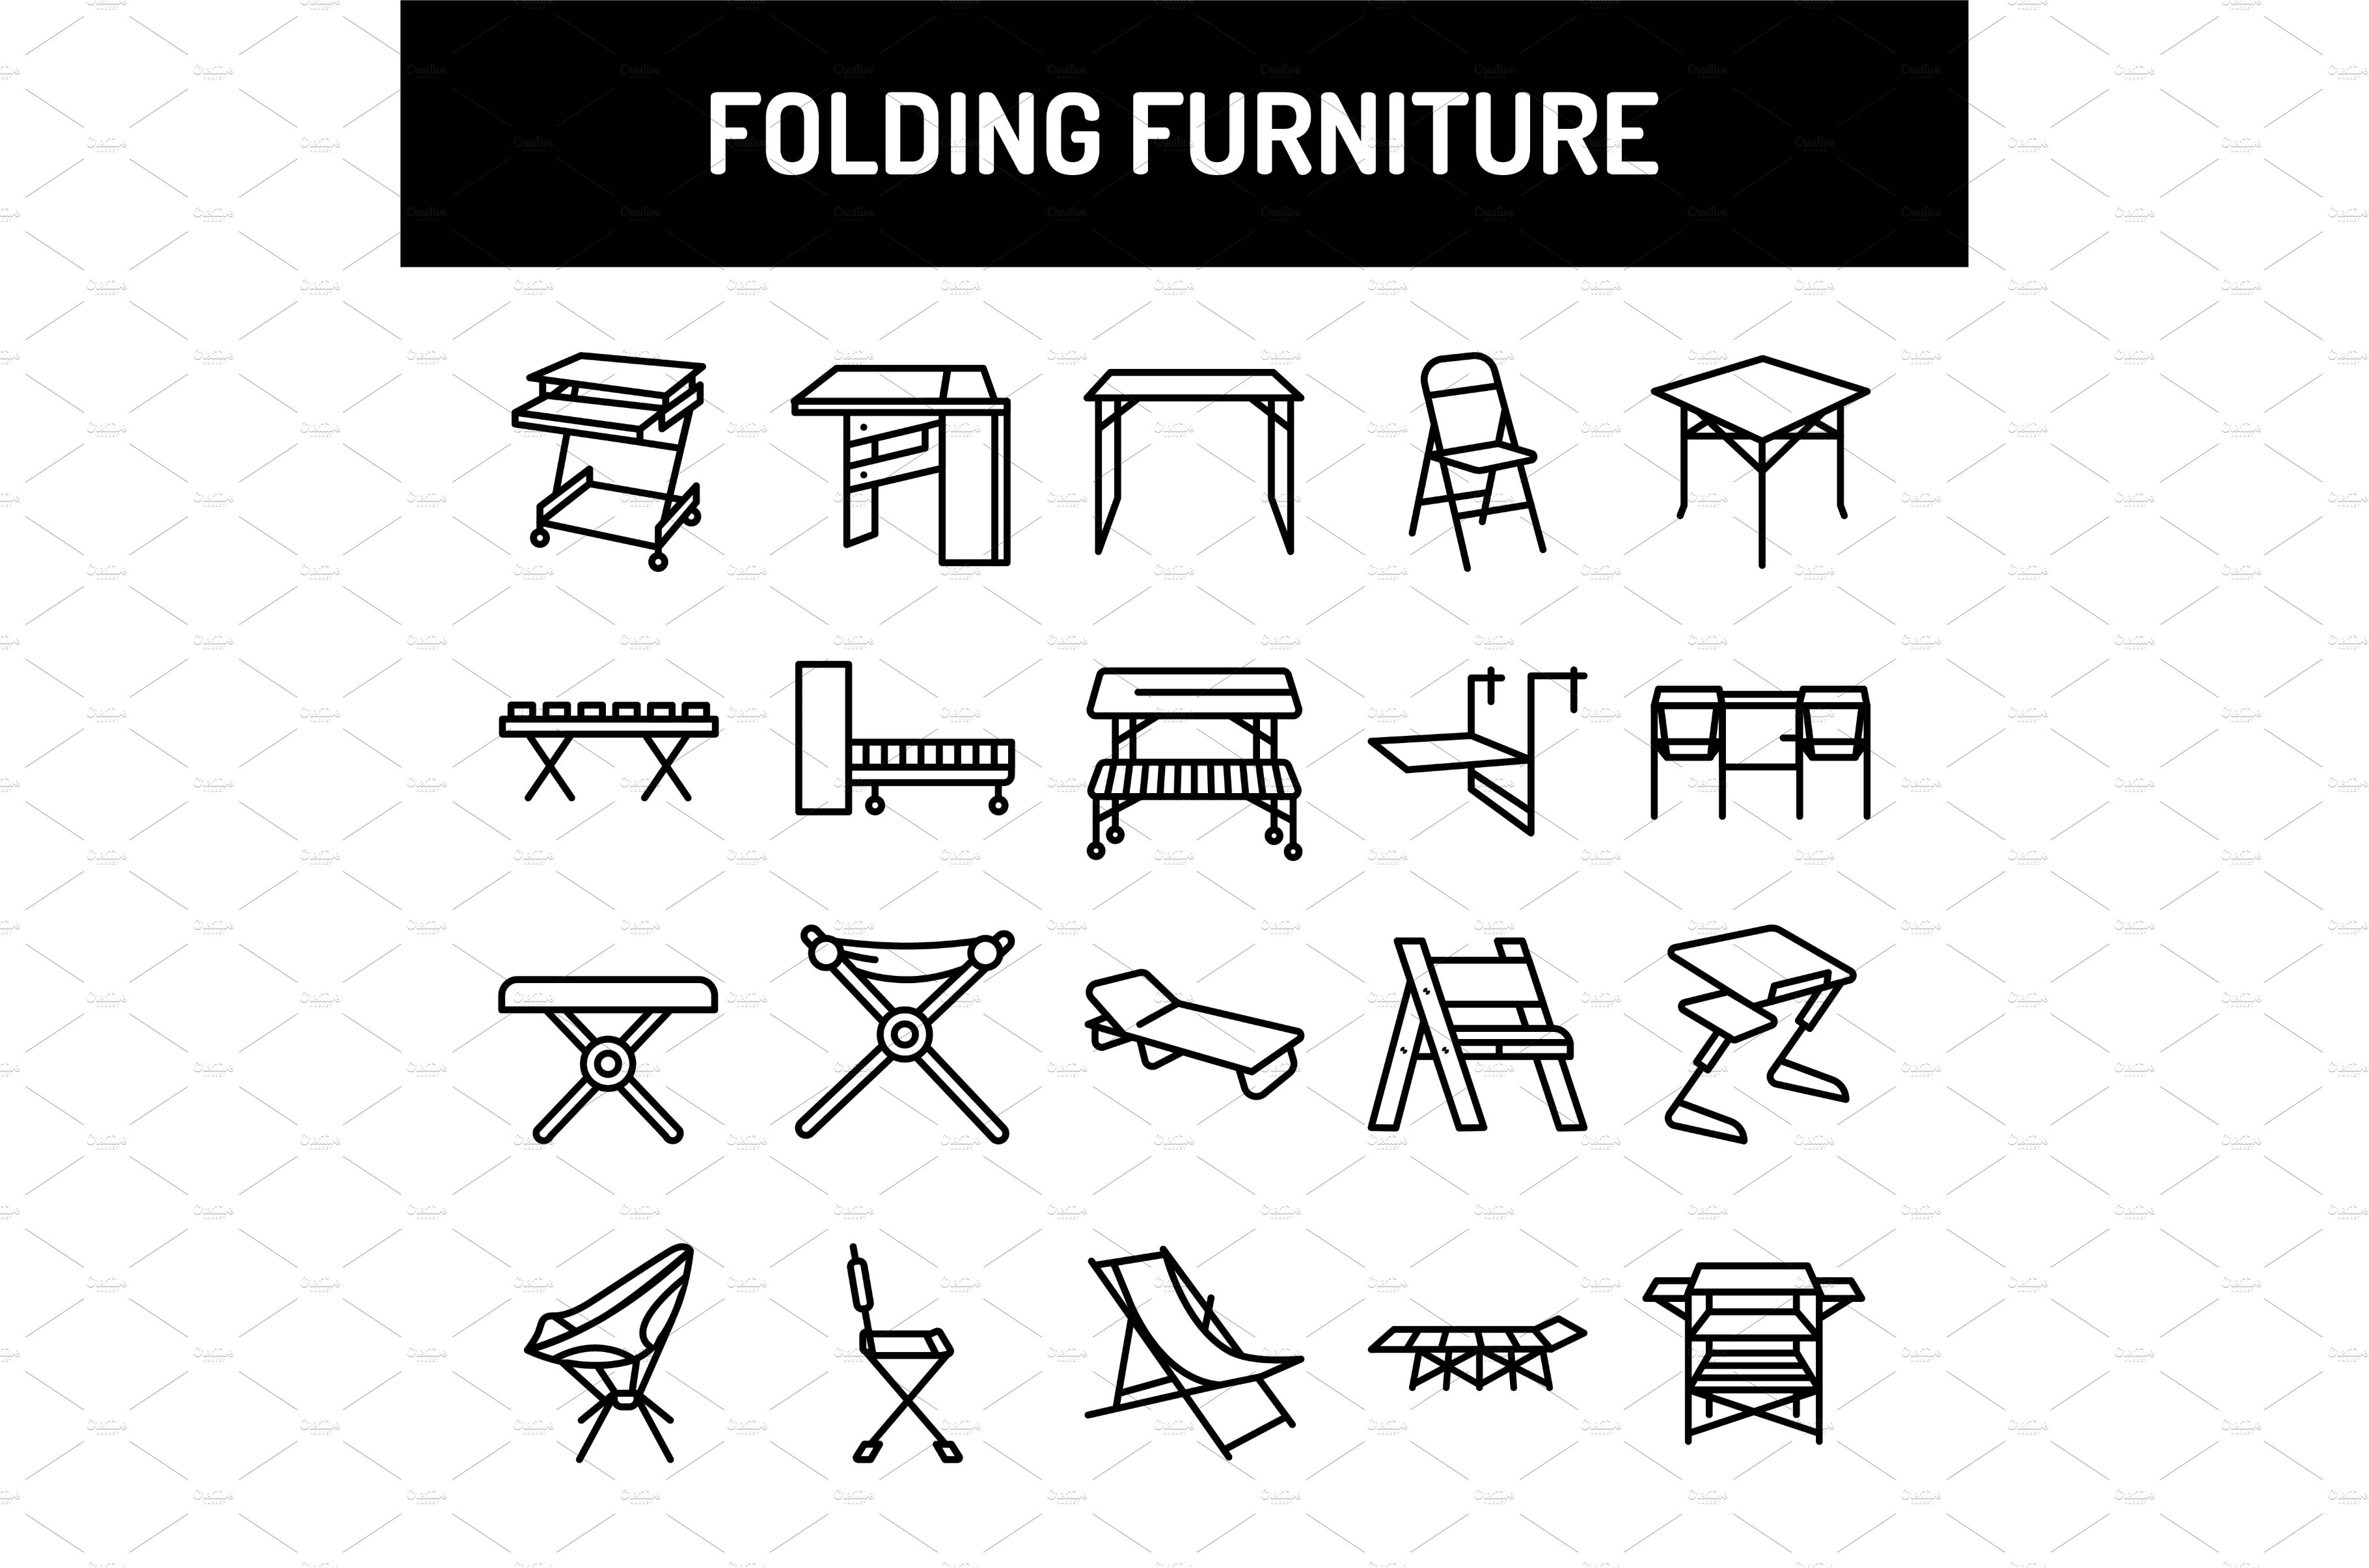 Folding furniture color line icons cover image.